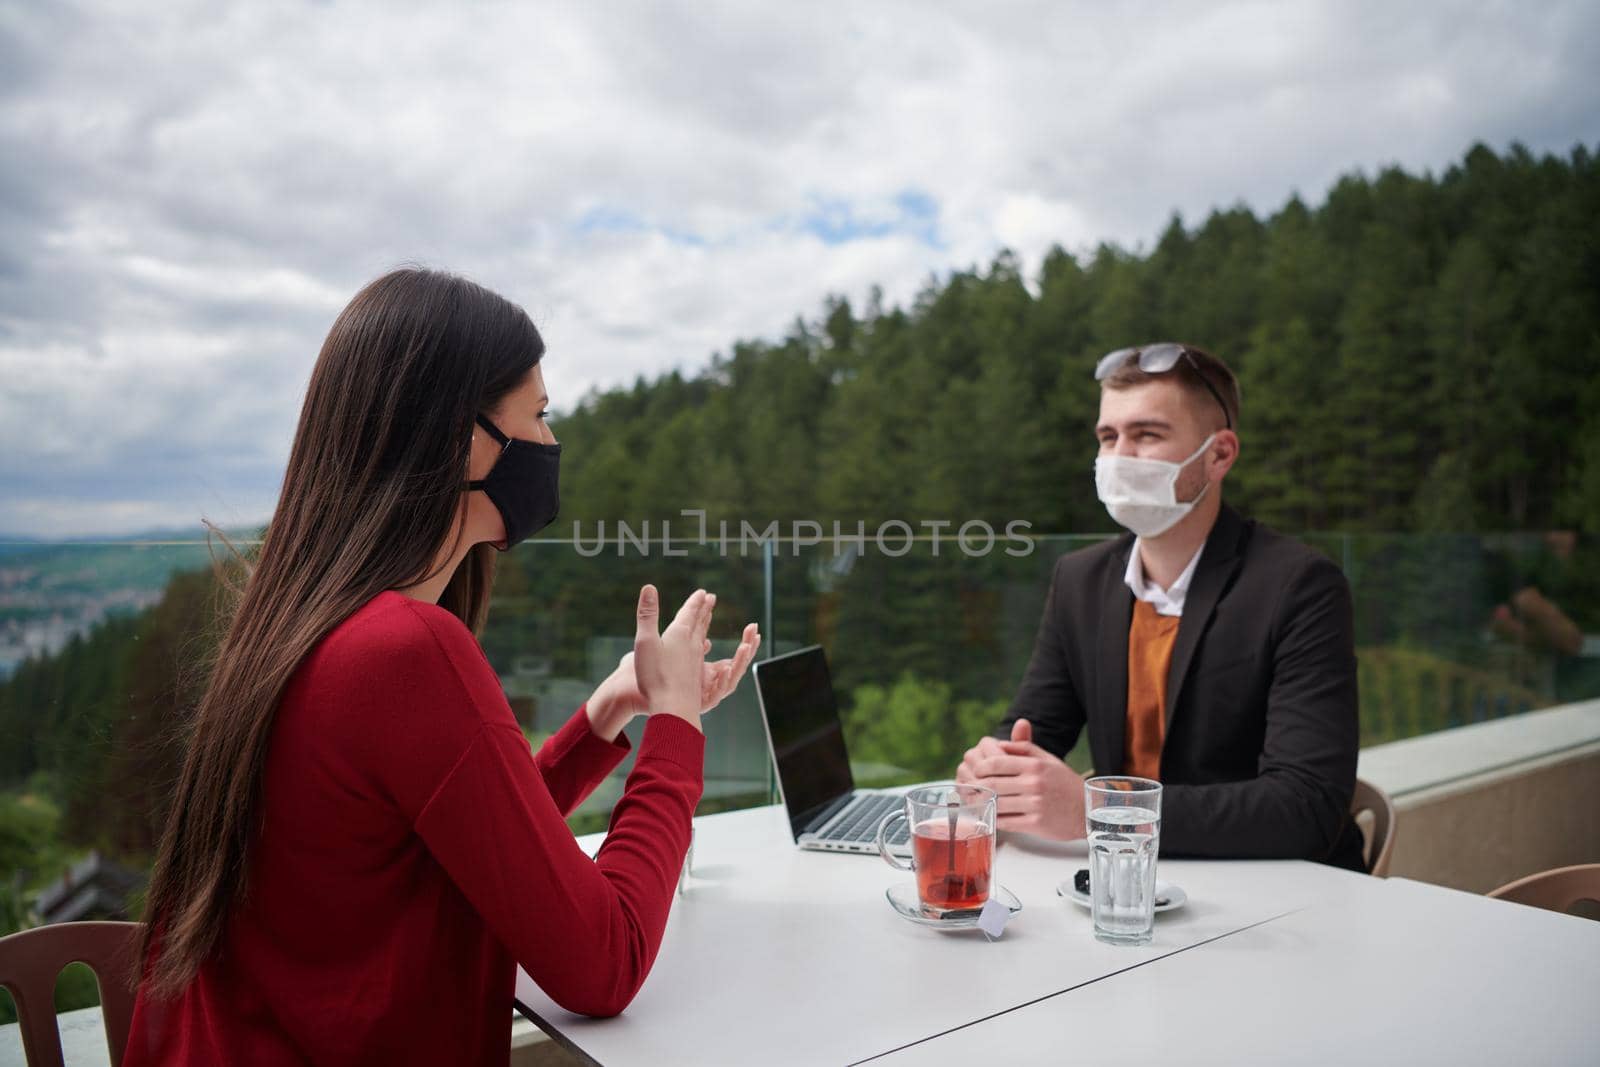 coronavirus outbreak Group of casual business People in outdoor restaurant wearing protective medical mask, business team collaborating and brainstorming business ideas  while working on laptop